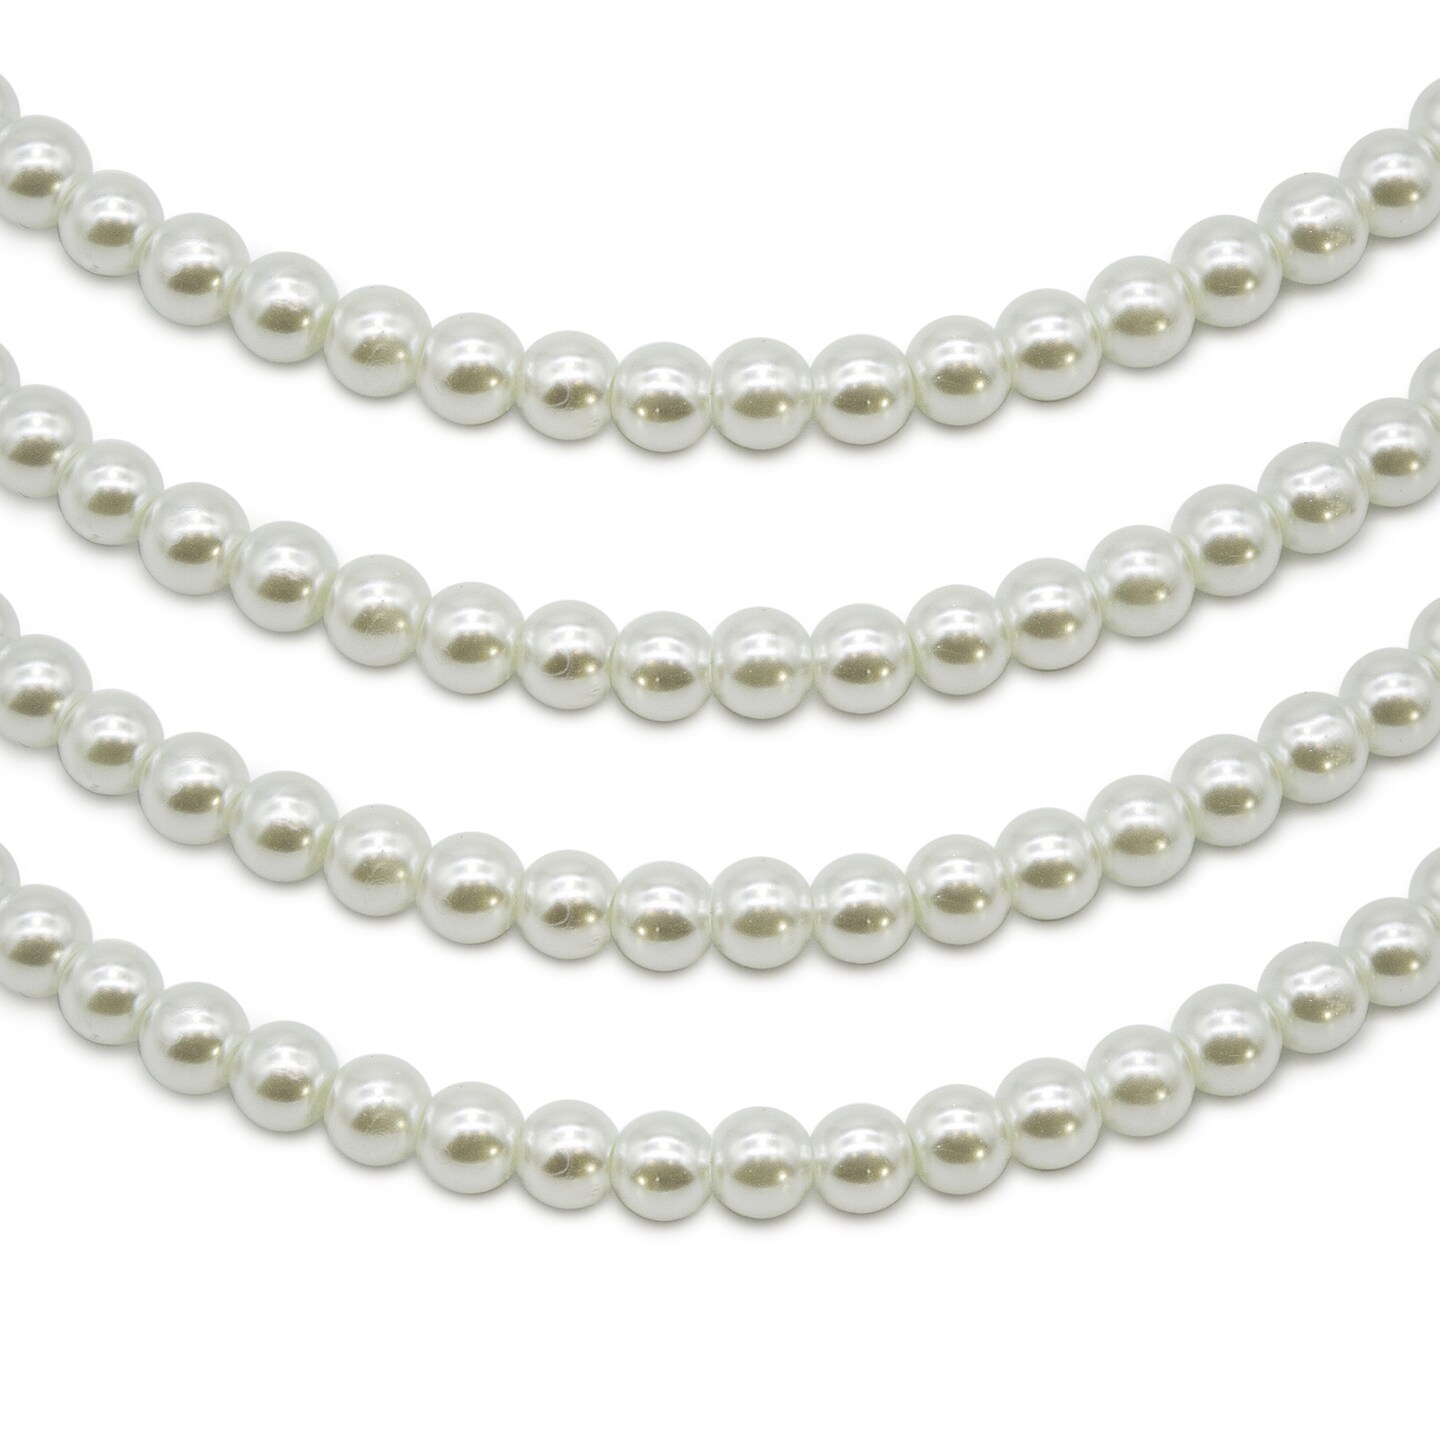 4 Strands of 4mm White Glass Pearl Beads - 800 on 30-Inch Strands